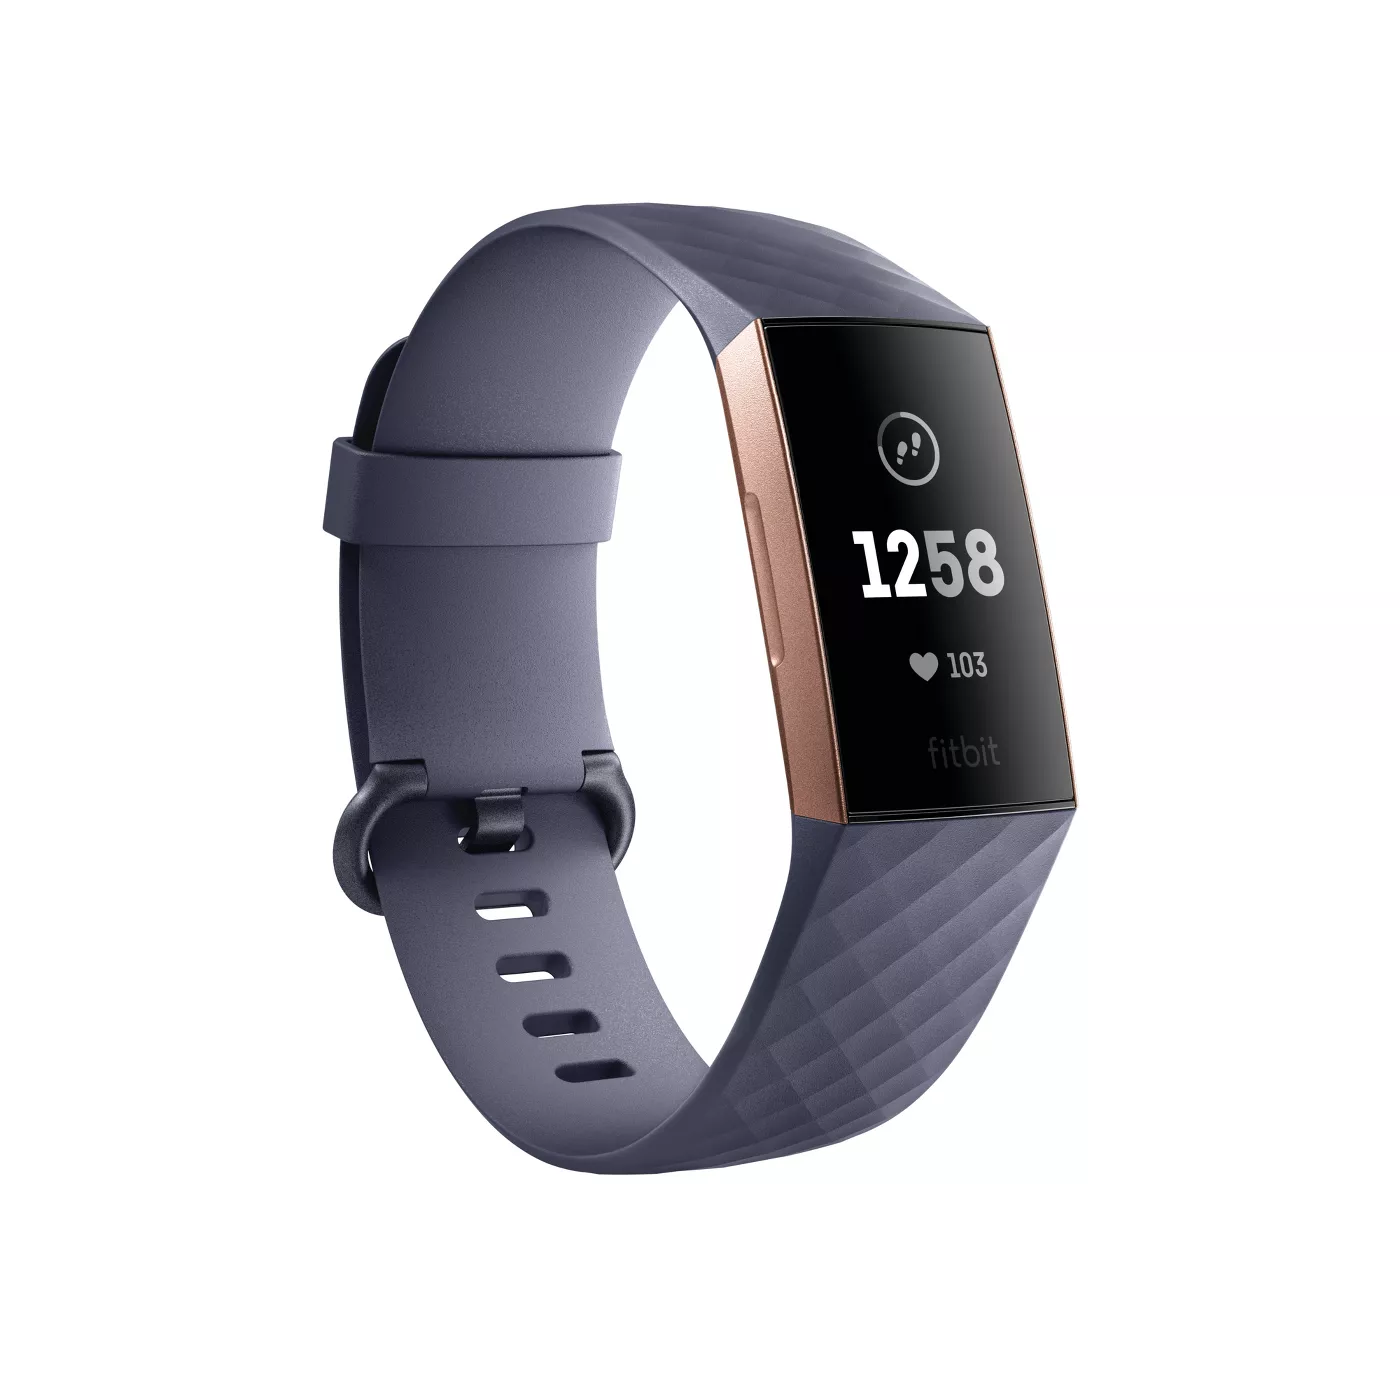 Fitbit Charge 3 Fitness Tracker - image 1 of 6